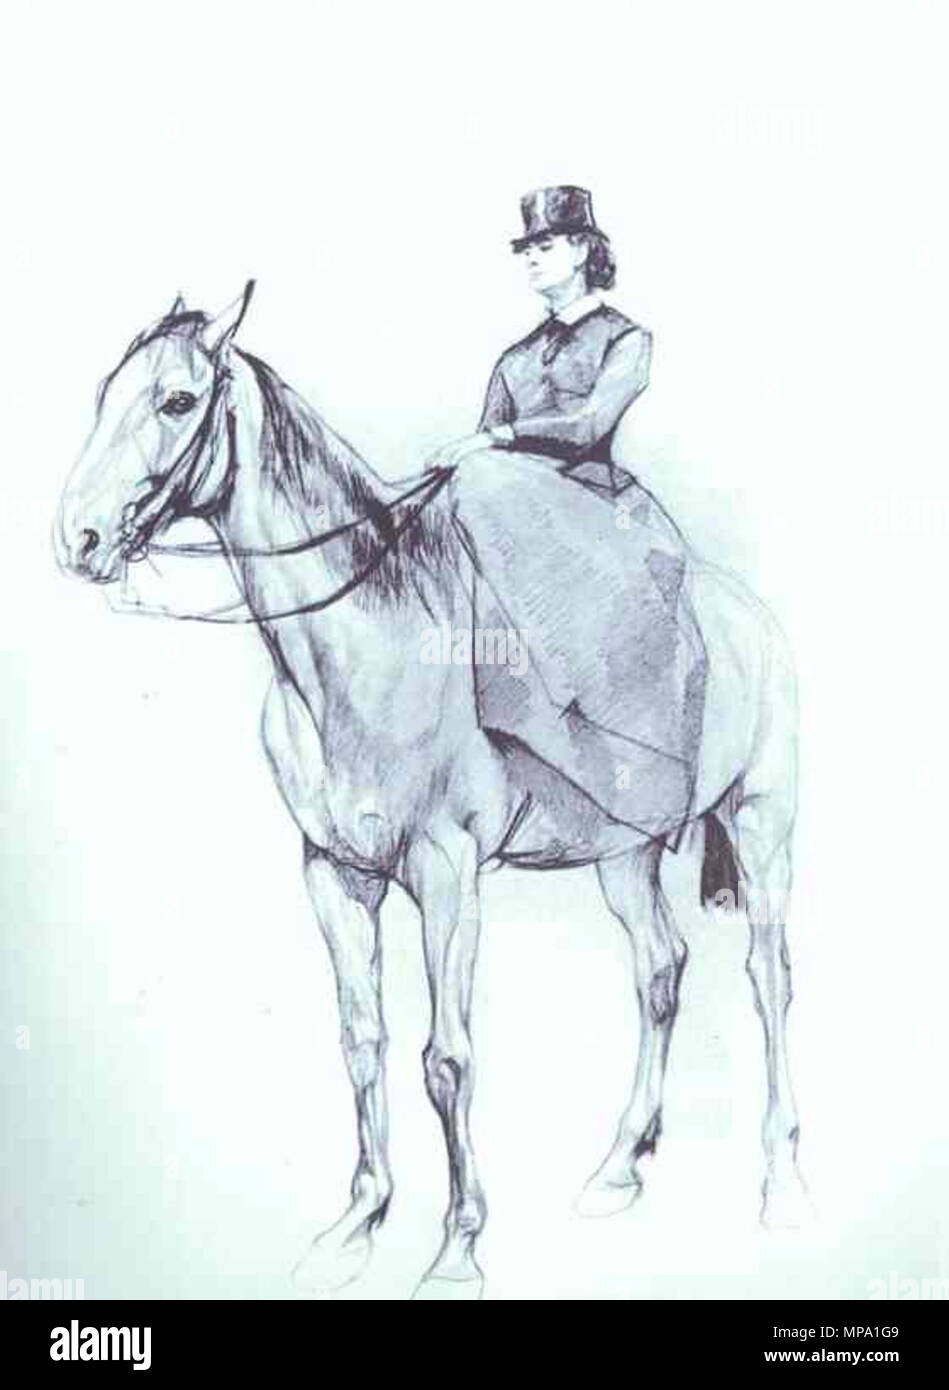 . Maria Mamontova Riding a Horse. 1884. Pencil on paper mounted on cardboard. Private collection. .   Valentin Serov  (1865–1911)     Alternative names Russian: Валентин Александрович Серов  Description Russian painter  Date of birth/death 19 January 1865 (7 January 1865 in Julian calendar) 22 November 1911 (5 December 1911 in Julian calendar)  Location of birth/death Saint Petersburg Moscow  Work location Netherlands (1885); Belgium (1885); Germany (1855); Italy (1887); Paris (1889); Italy (1904); Greece (1907); Italy (1910); Paris (1910); Munich (1872 - 1873); Paris (1874 - 1875); Moscow (18 Stock Photo